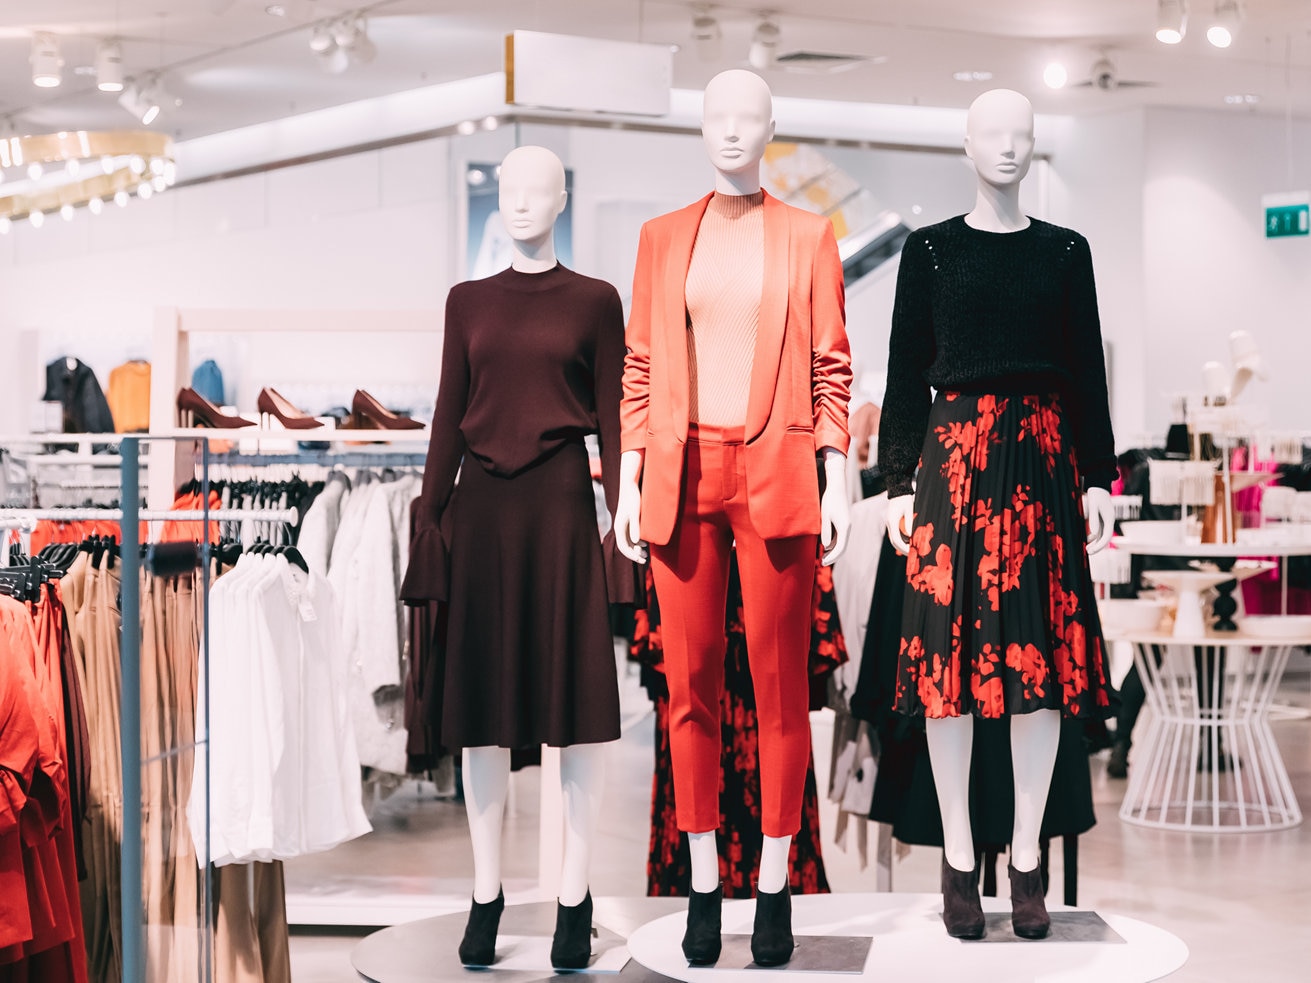 Mannequins displaying womens clothing in bright store